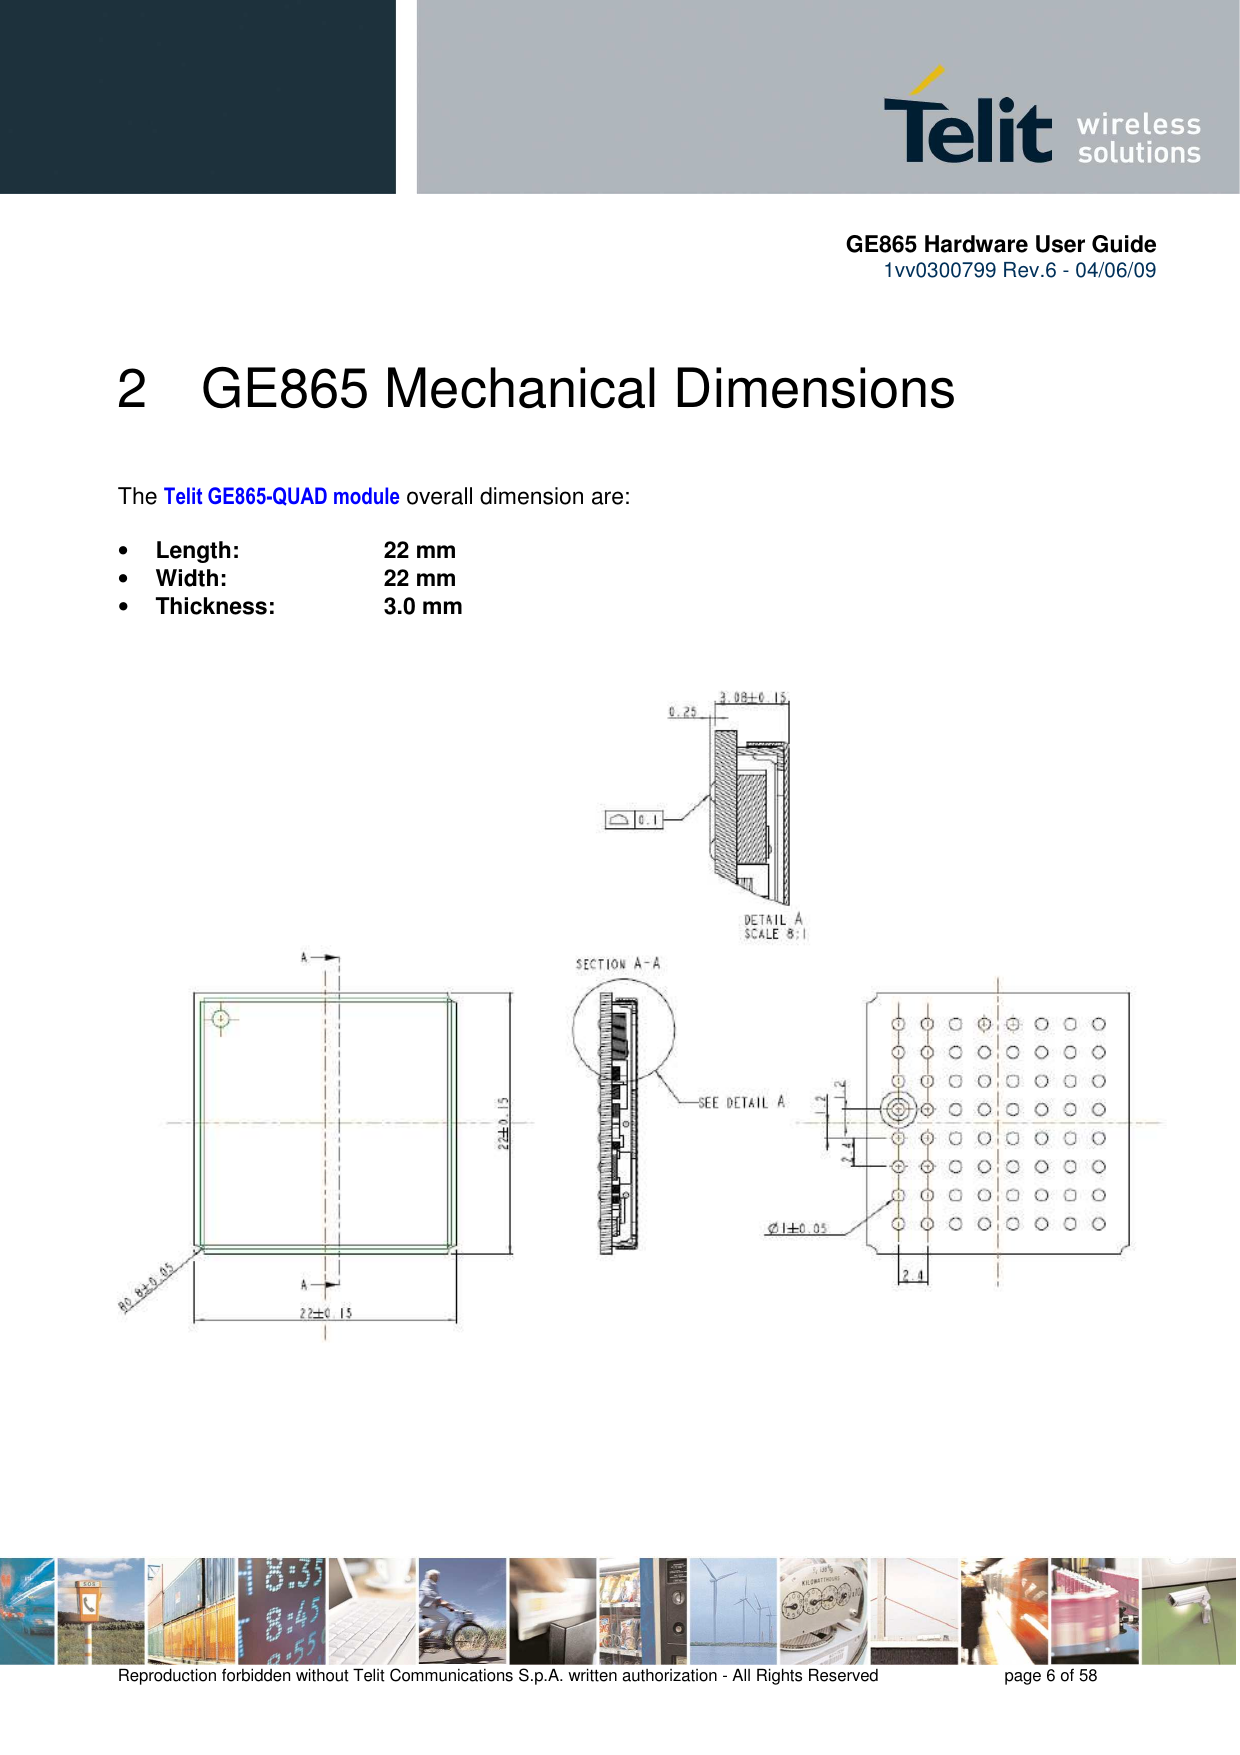       GE865 Hardware User Guide 1vv0300799 Rev.6 - 04/06/09      Reproduction forbidden without Telit Communications S.p.A. written authorization - All Rights Reserved    page 6 of 58  2  GE865 Mechanical Dimensions  The Telit GE865-QUAD module overall dimension are:  • Length:     22 mm • Width:     22 mm  • Thickness:     3.0 mm    